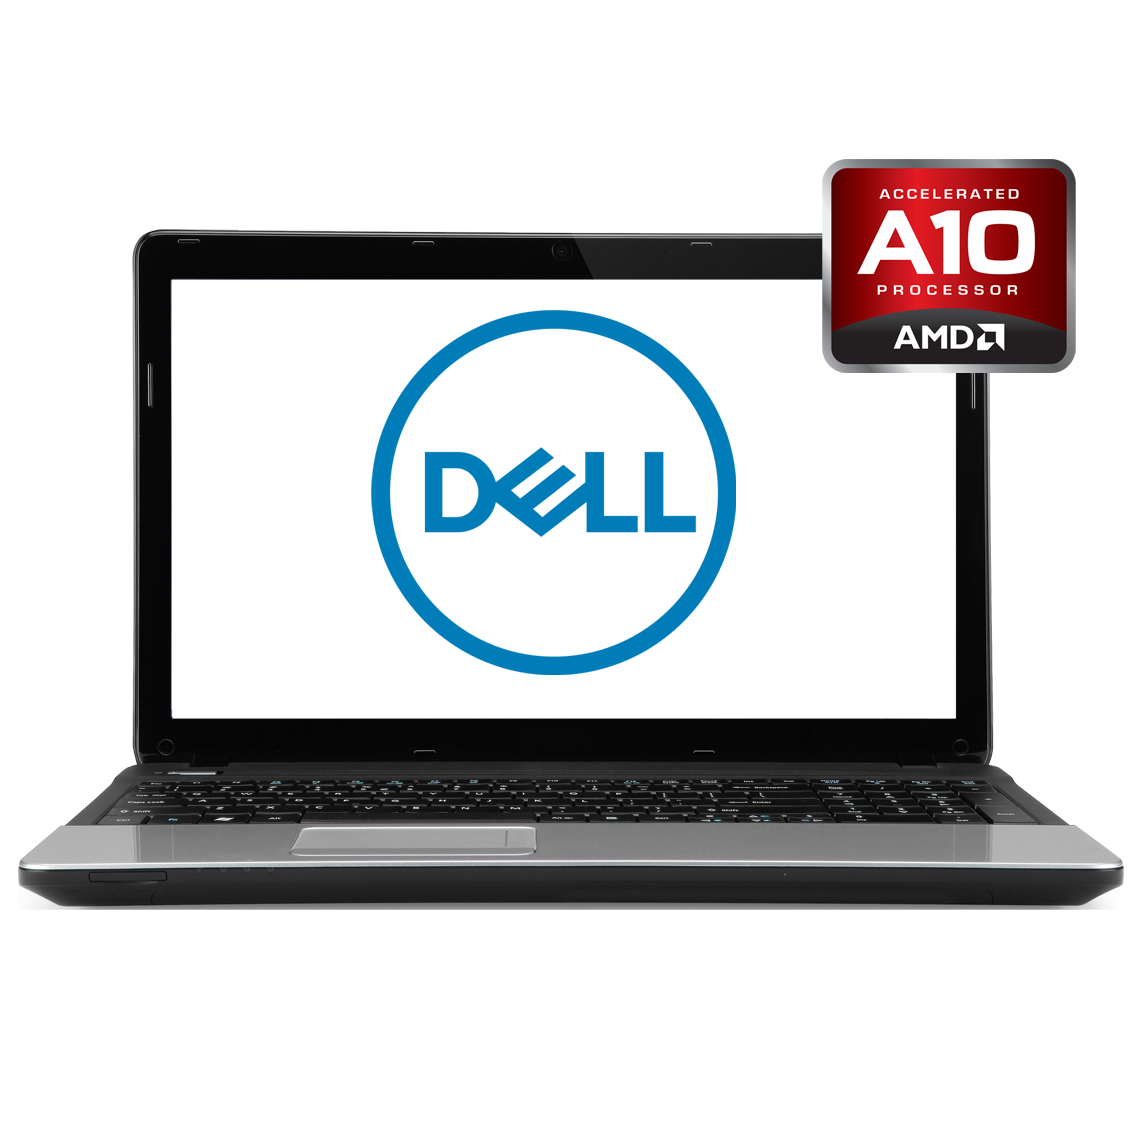 Sell My Dell Laptop, Trade In & Recycle Old Dell Laptop Online | Mazuma